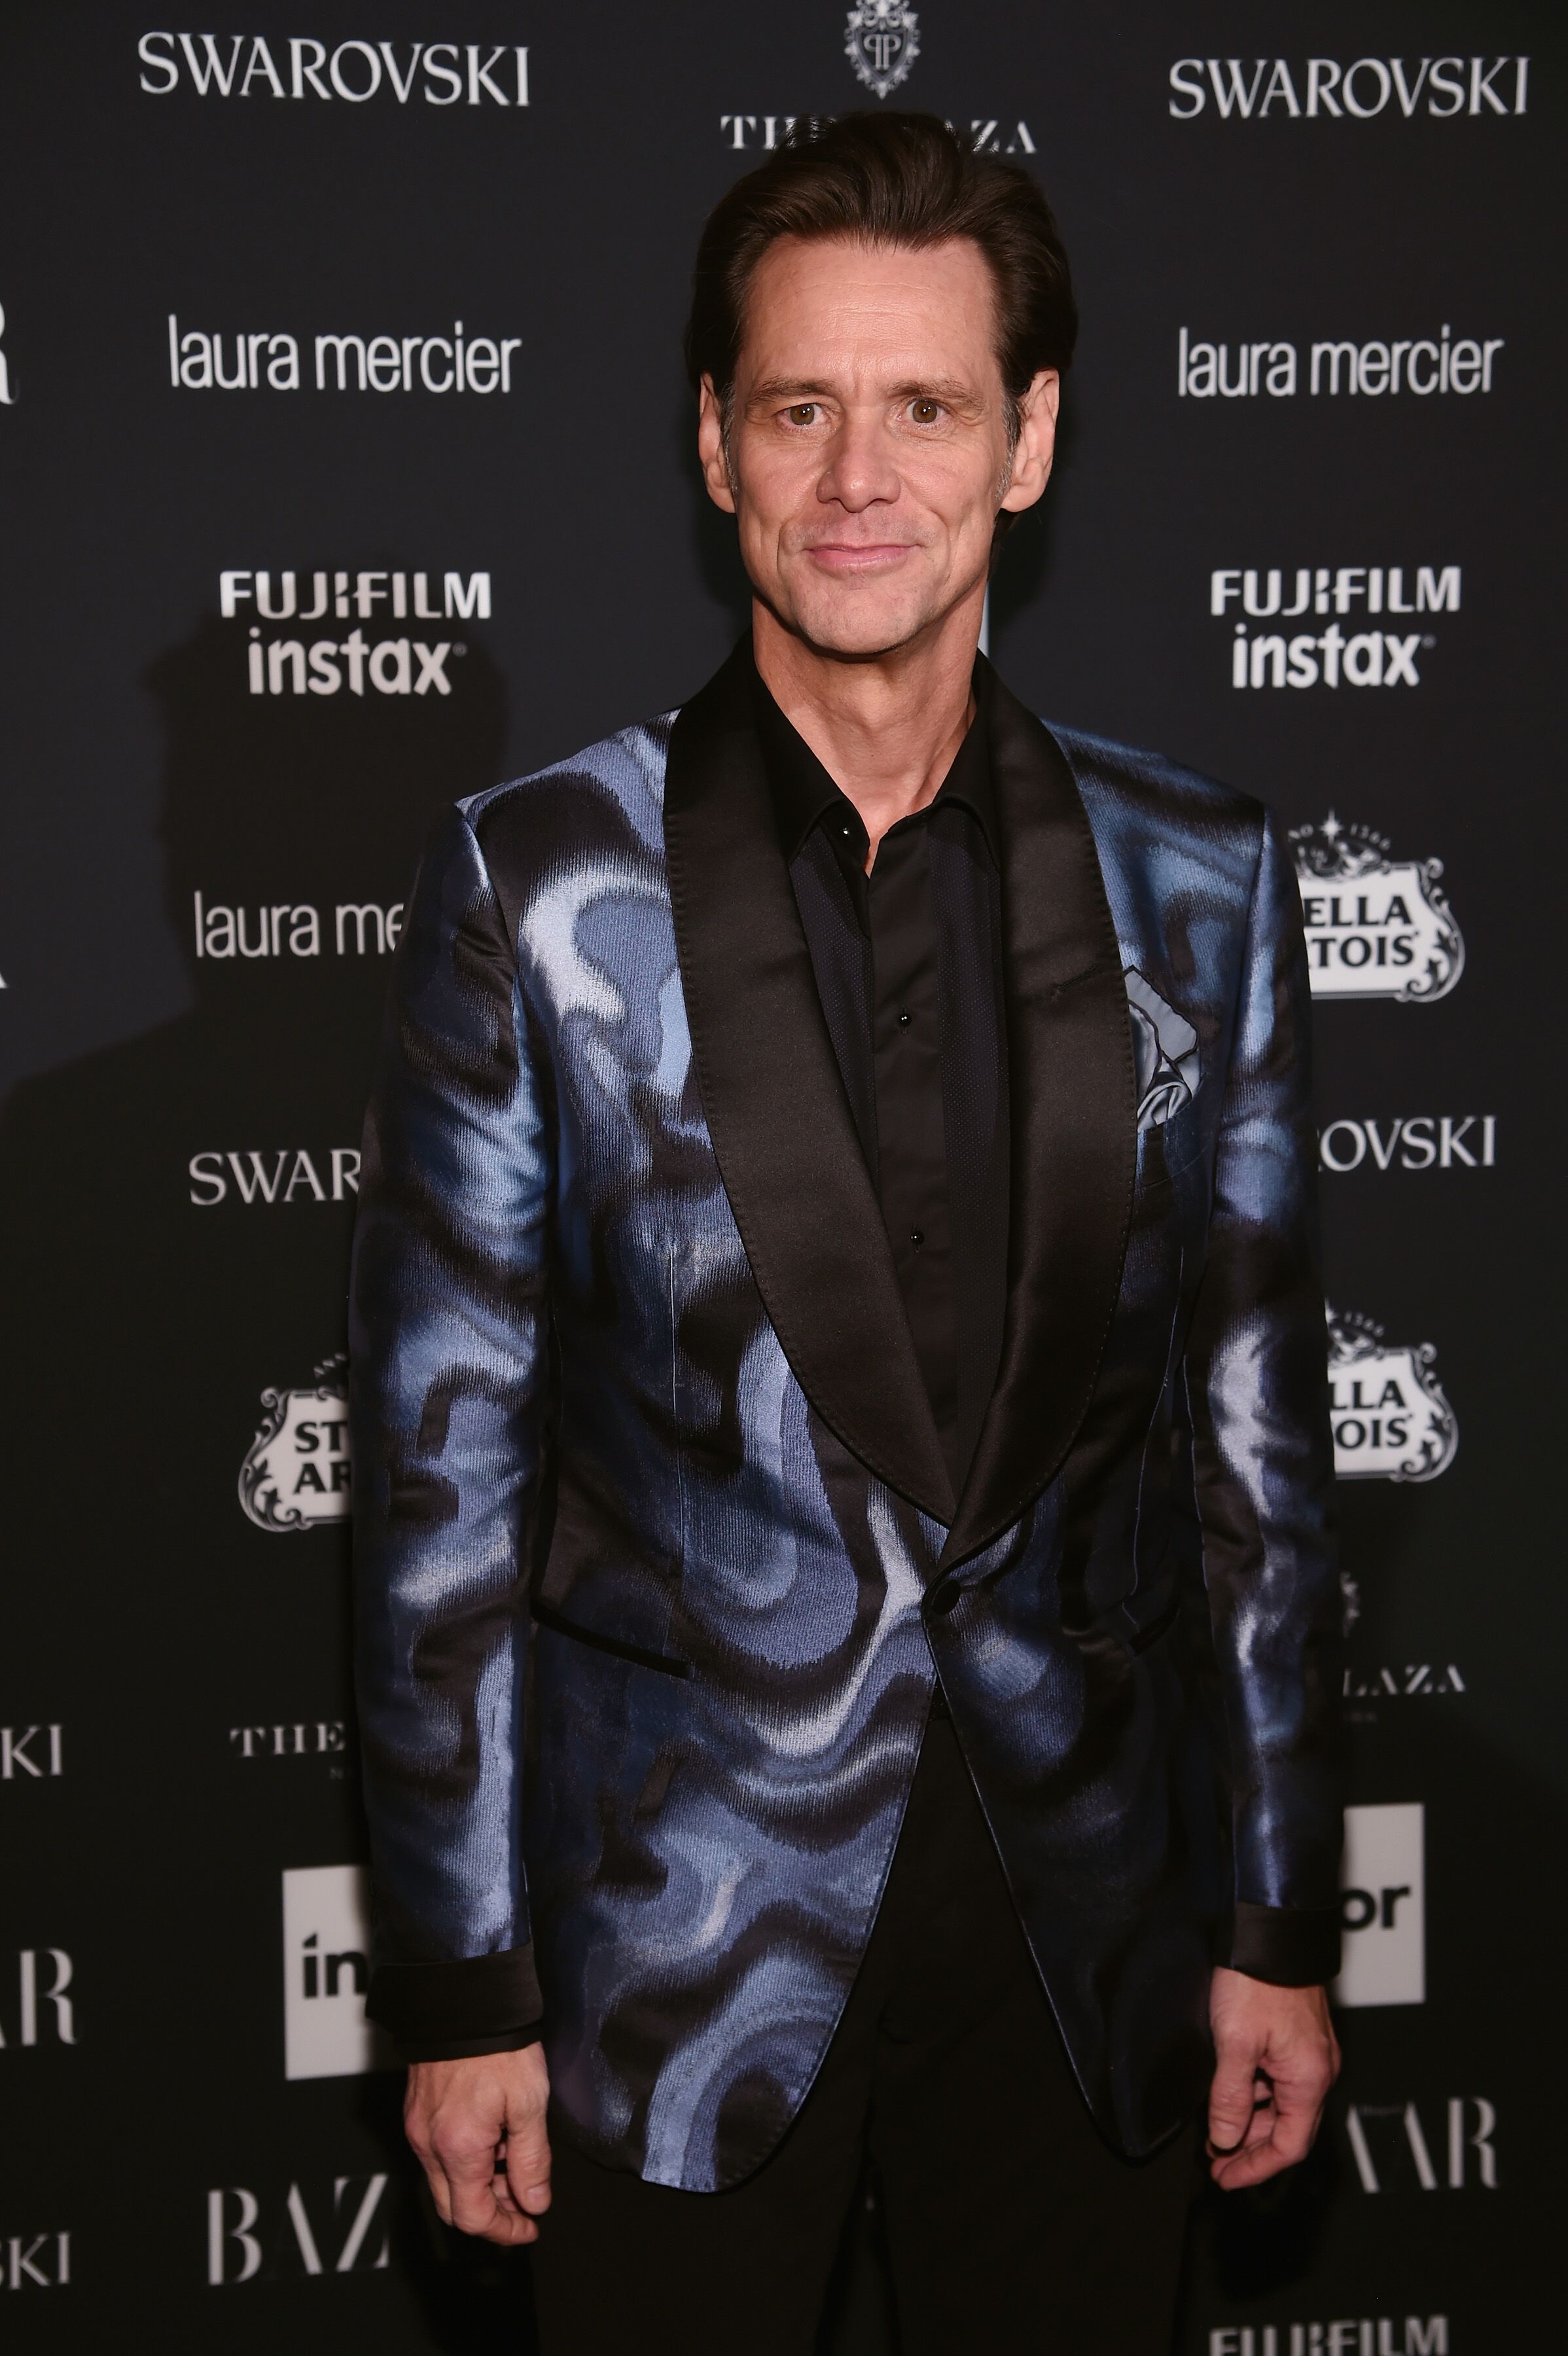 Jim Carrey attends Harper's BAZAAR Celebration of "ICONS By Carine Roitfeld" at The Plaza Hotel presented by Infor, Laura Mercier, Stella Artois, FUJIFILM and SWAROVSKI  | Getty Images